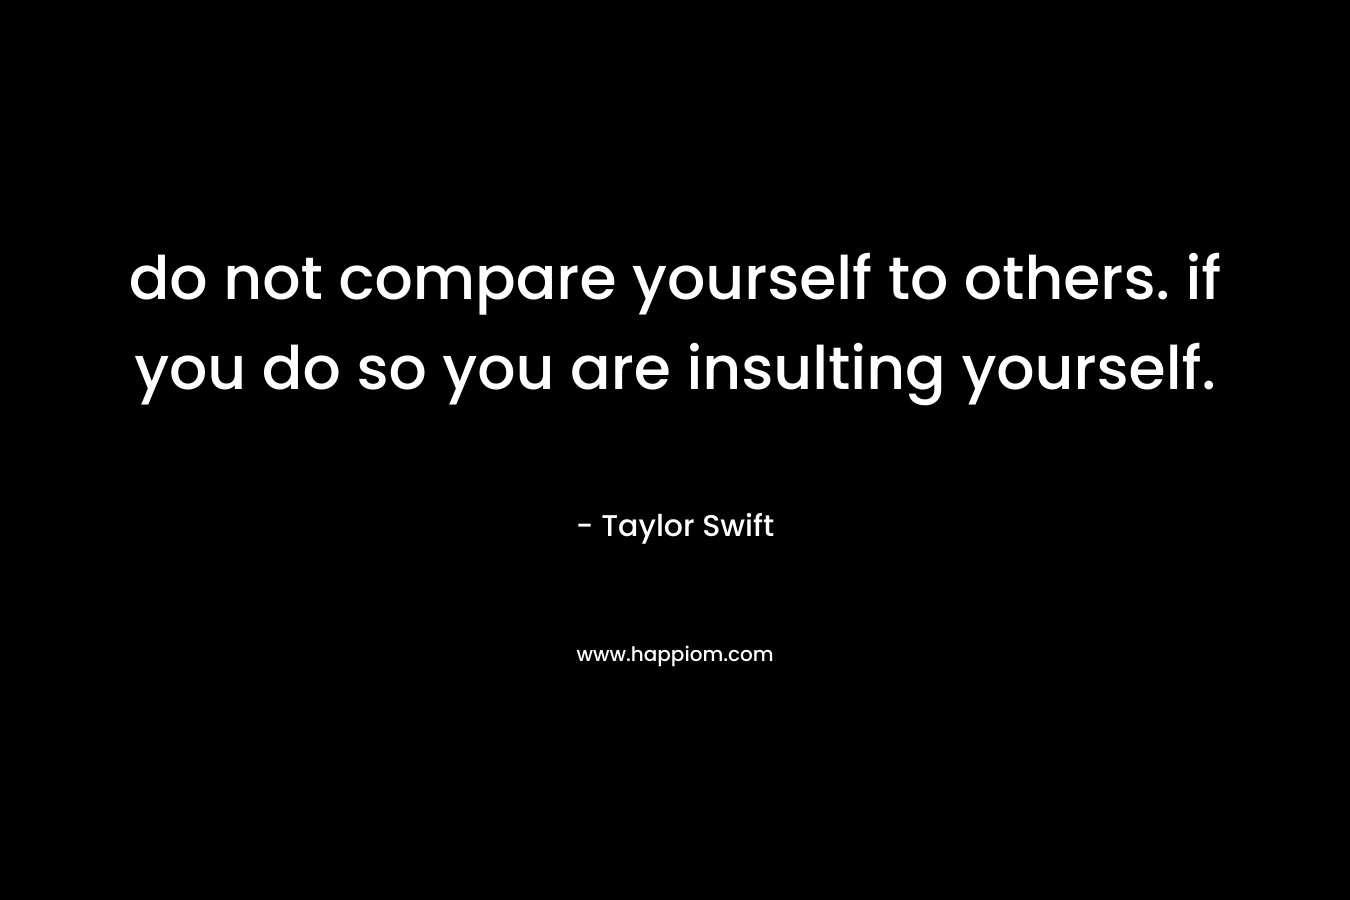 do not compare yourself to others. if you do so you are insulting yourself.